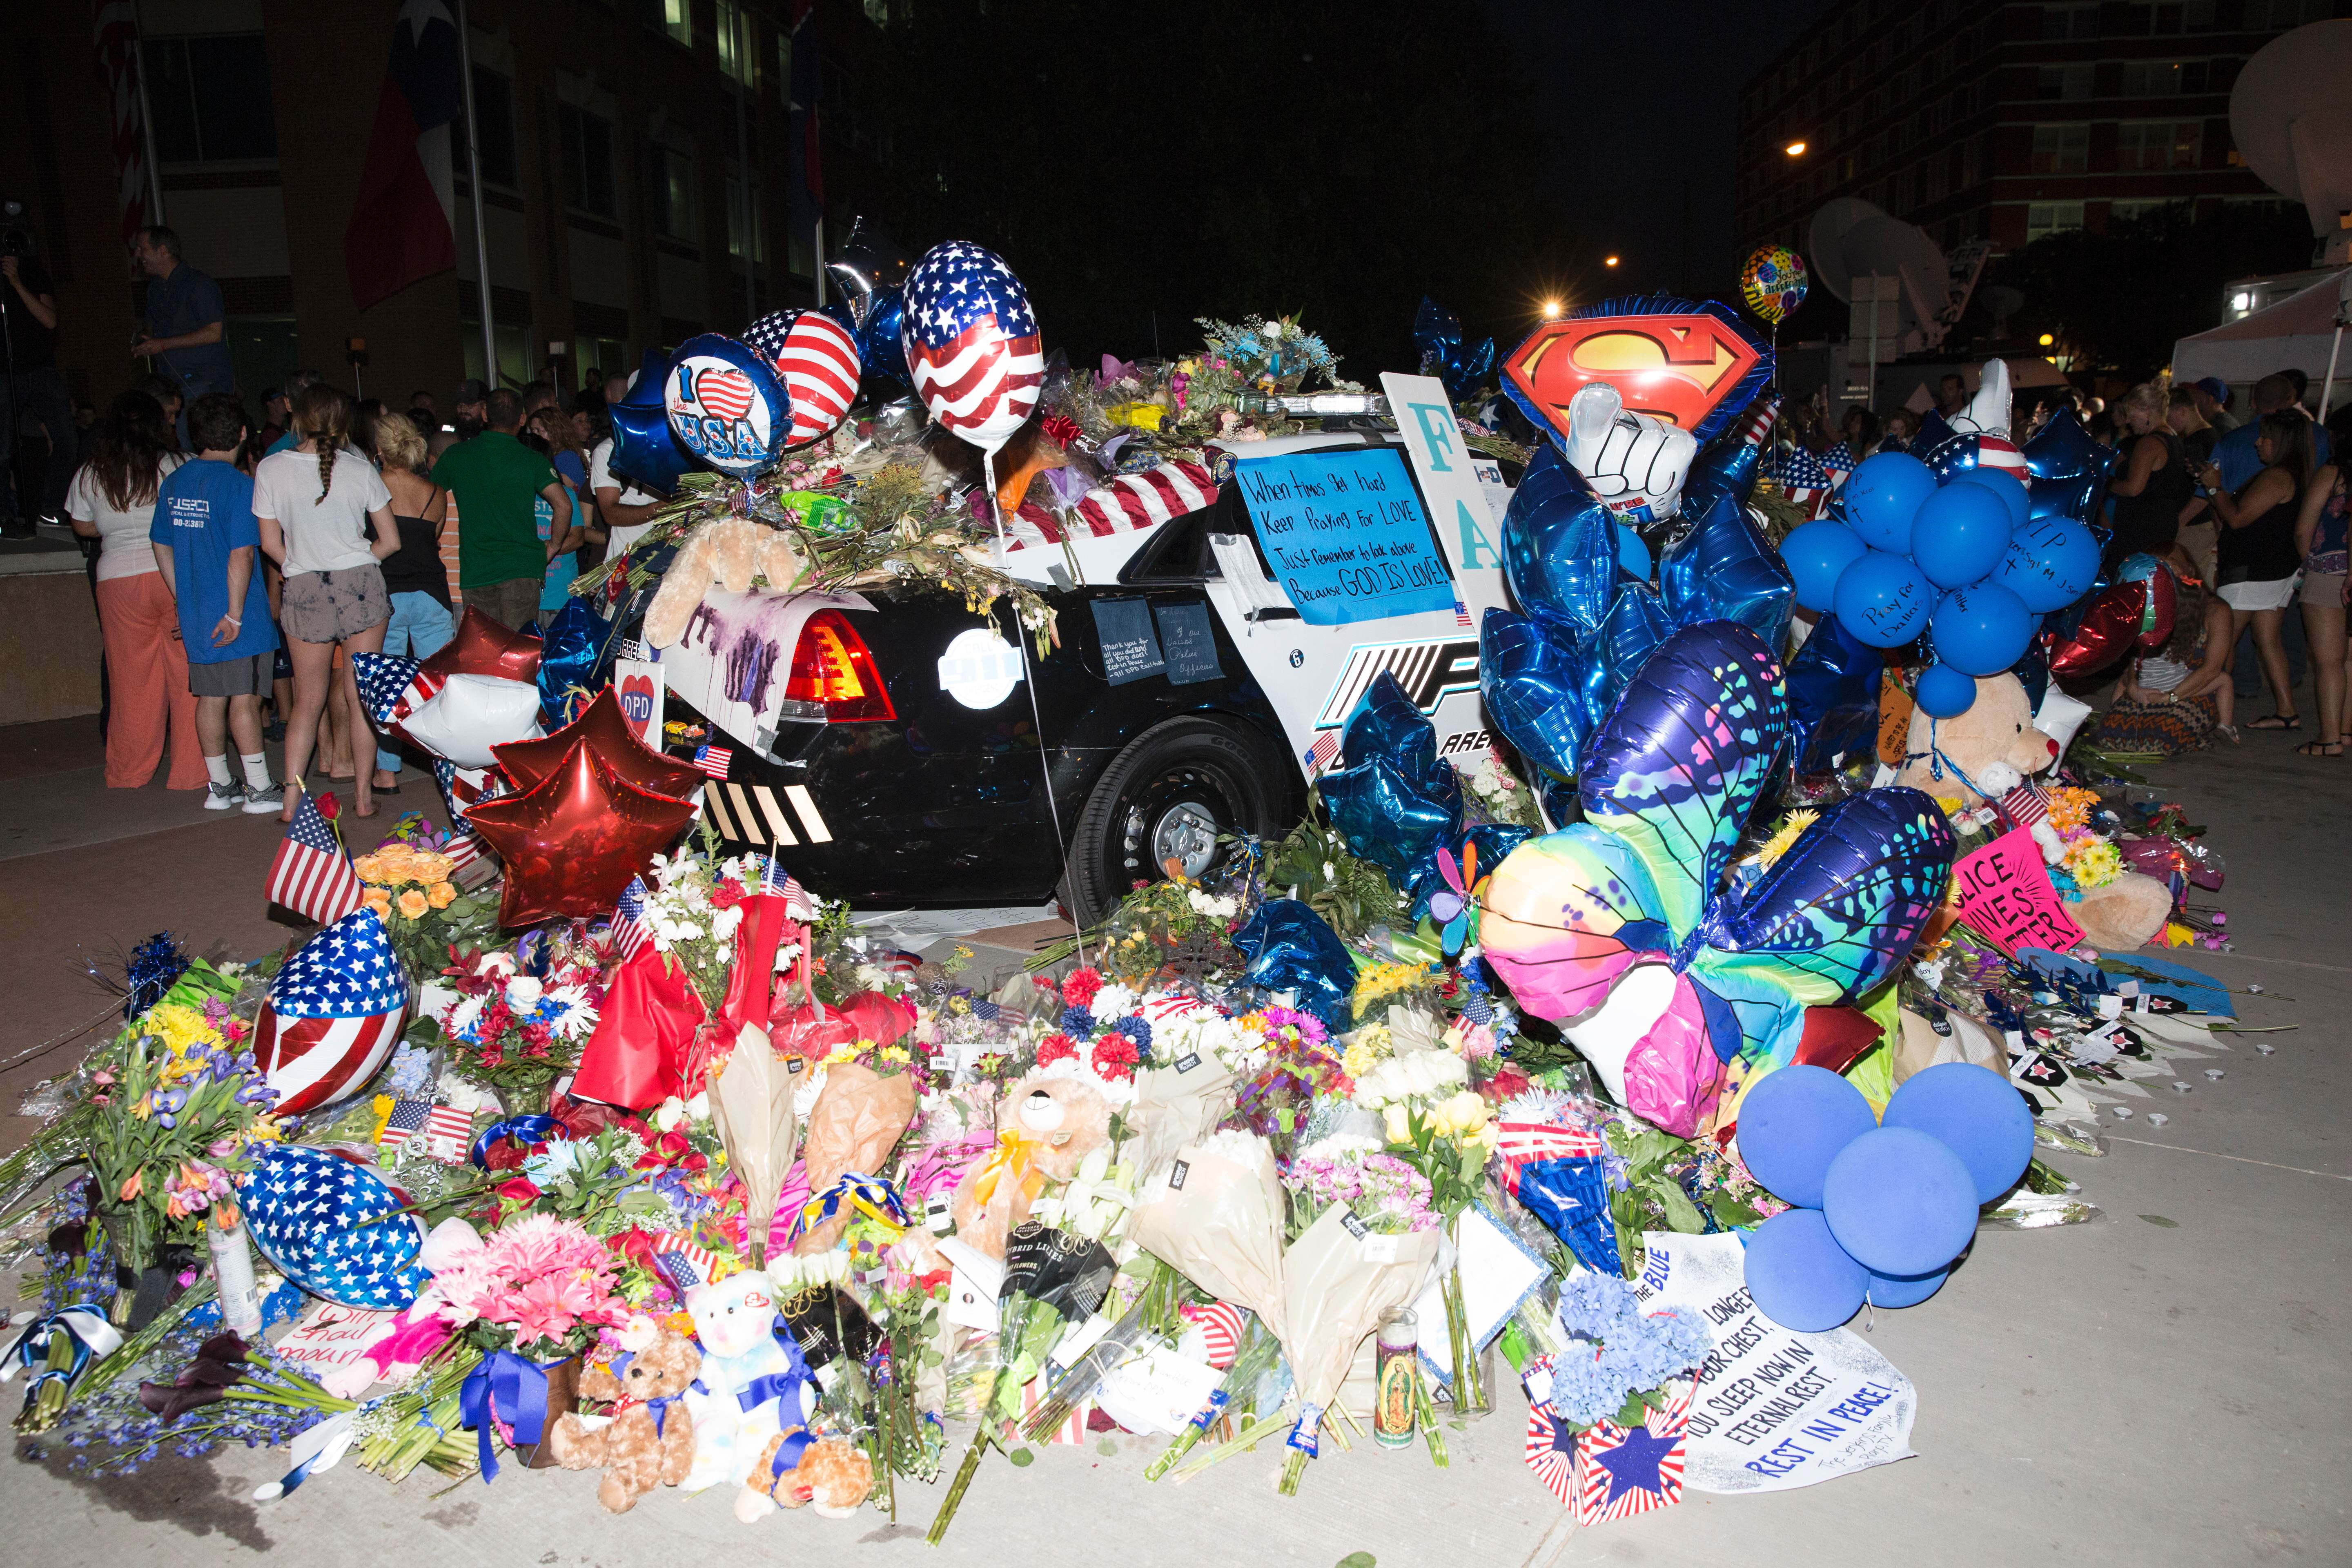 Flower, cards, balloons, and candles pile on top of police cruisers outside the Police Headquarters memorial for officers killed in the recent sniper attack in Dallas, Texas on July 10, 2016. (Getty)